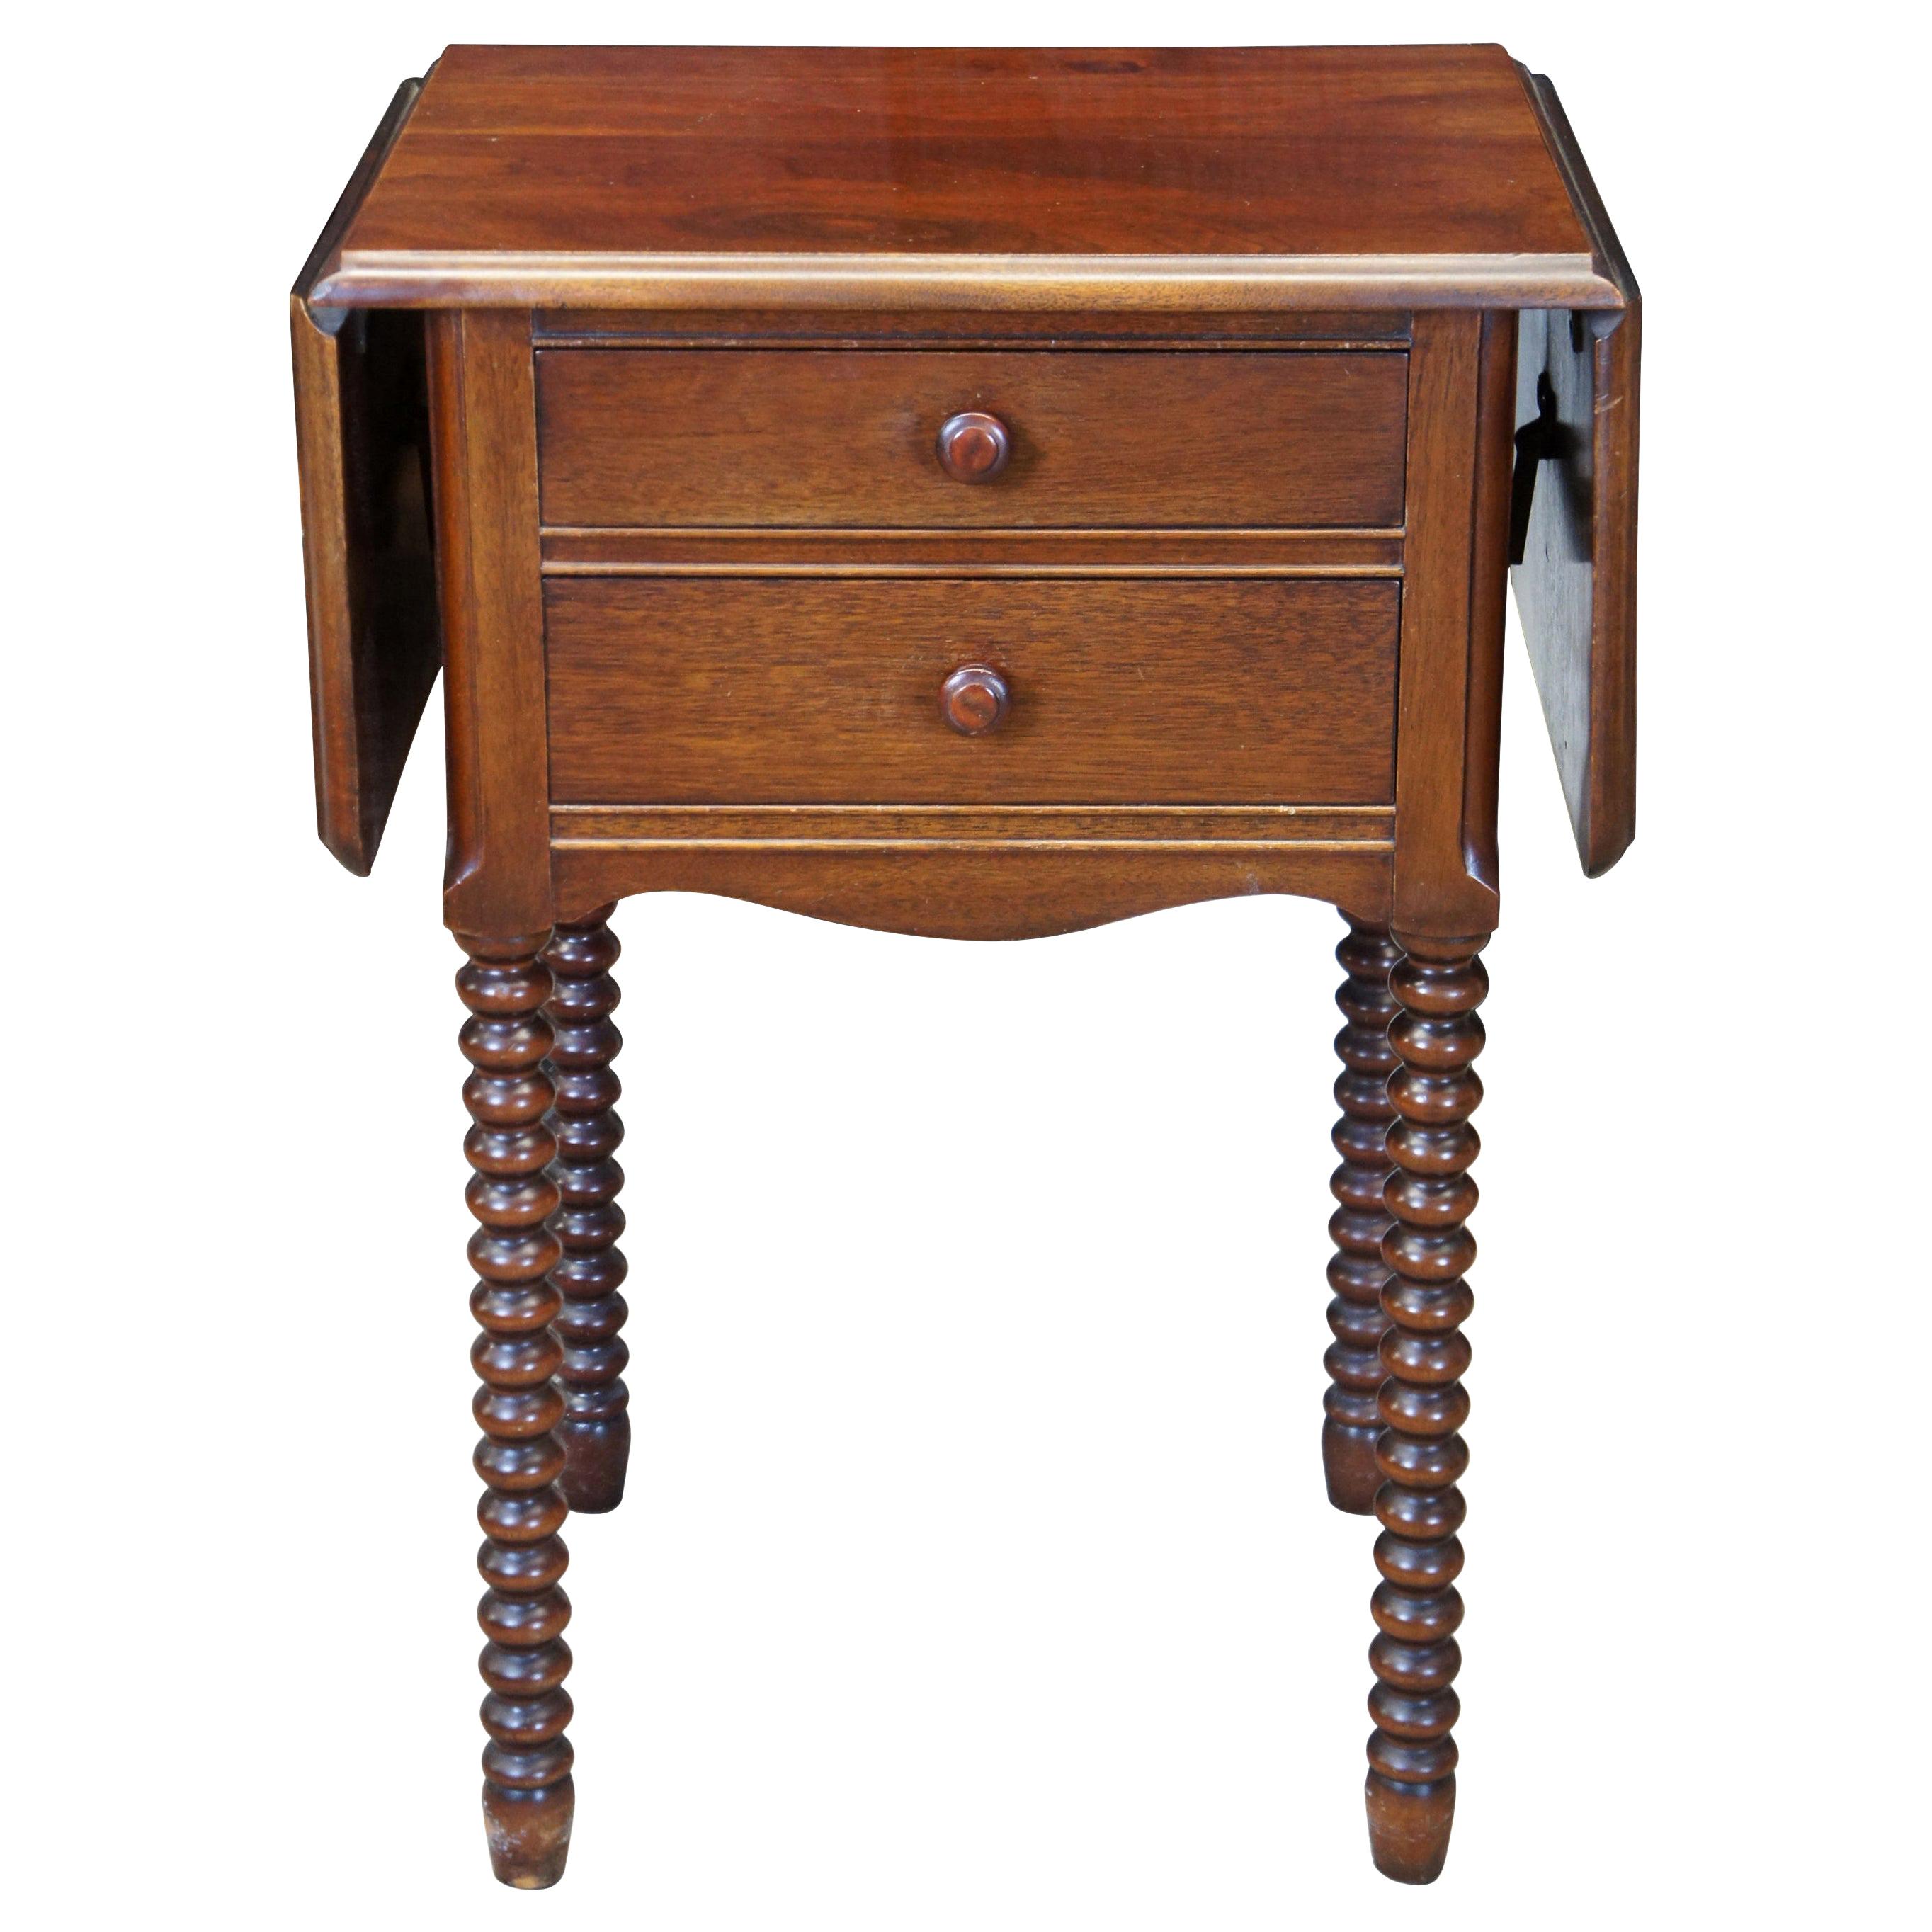 Mid-20th Century Early American Style Dropleaf Side End Accent Table Nightstand